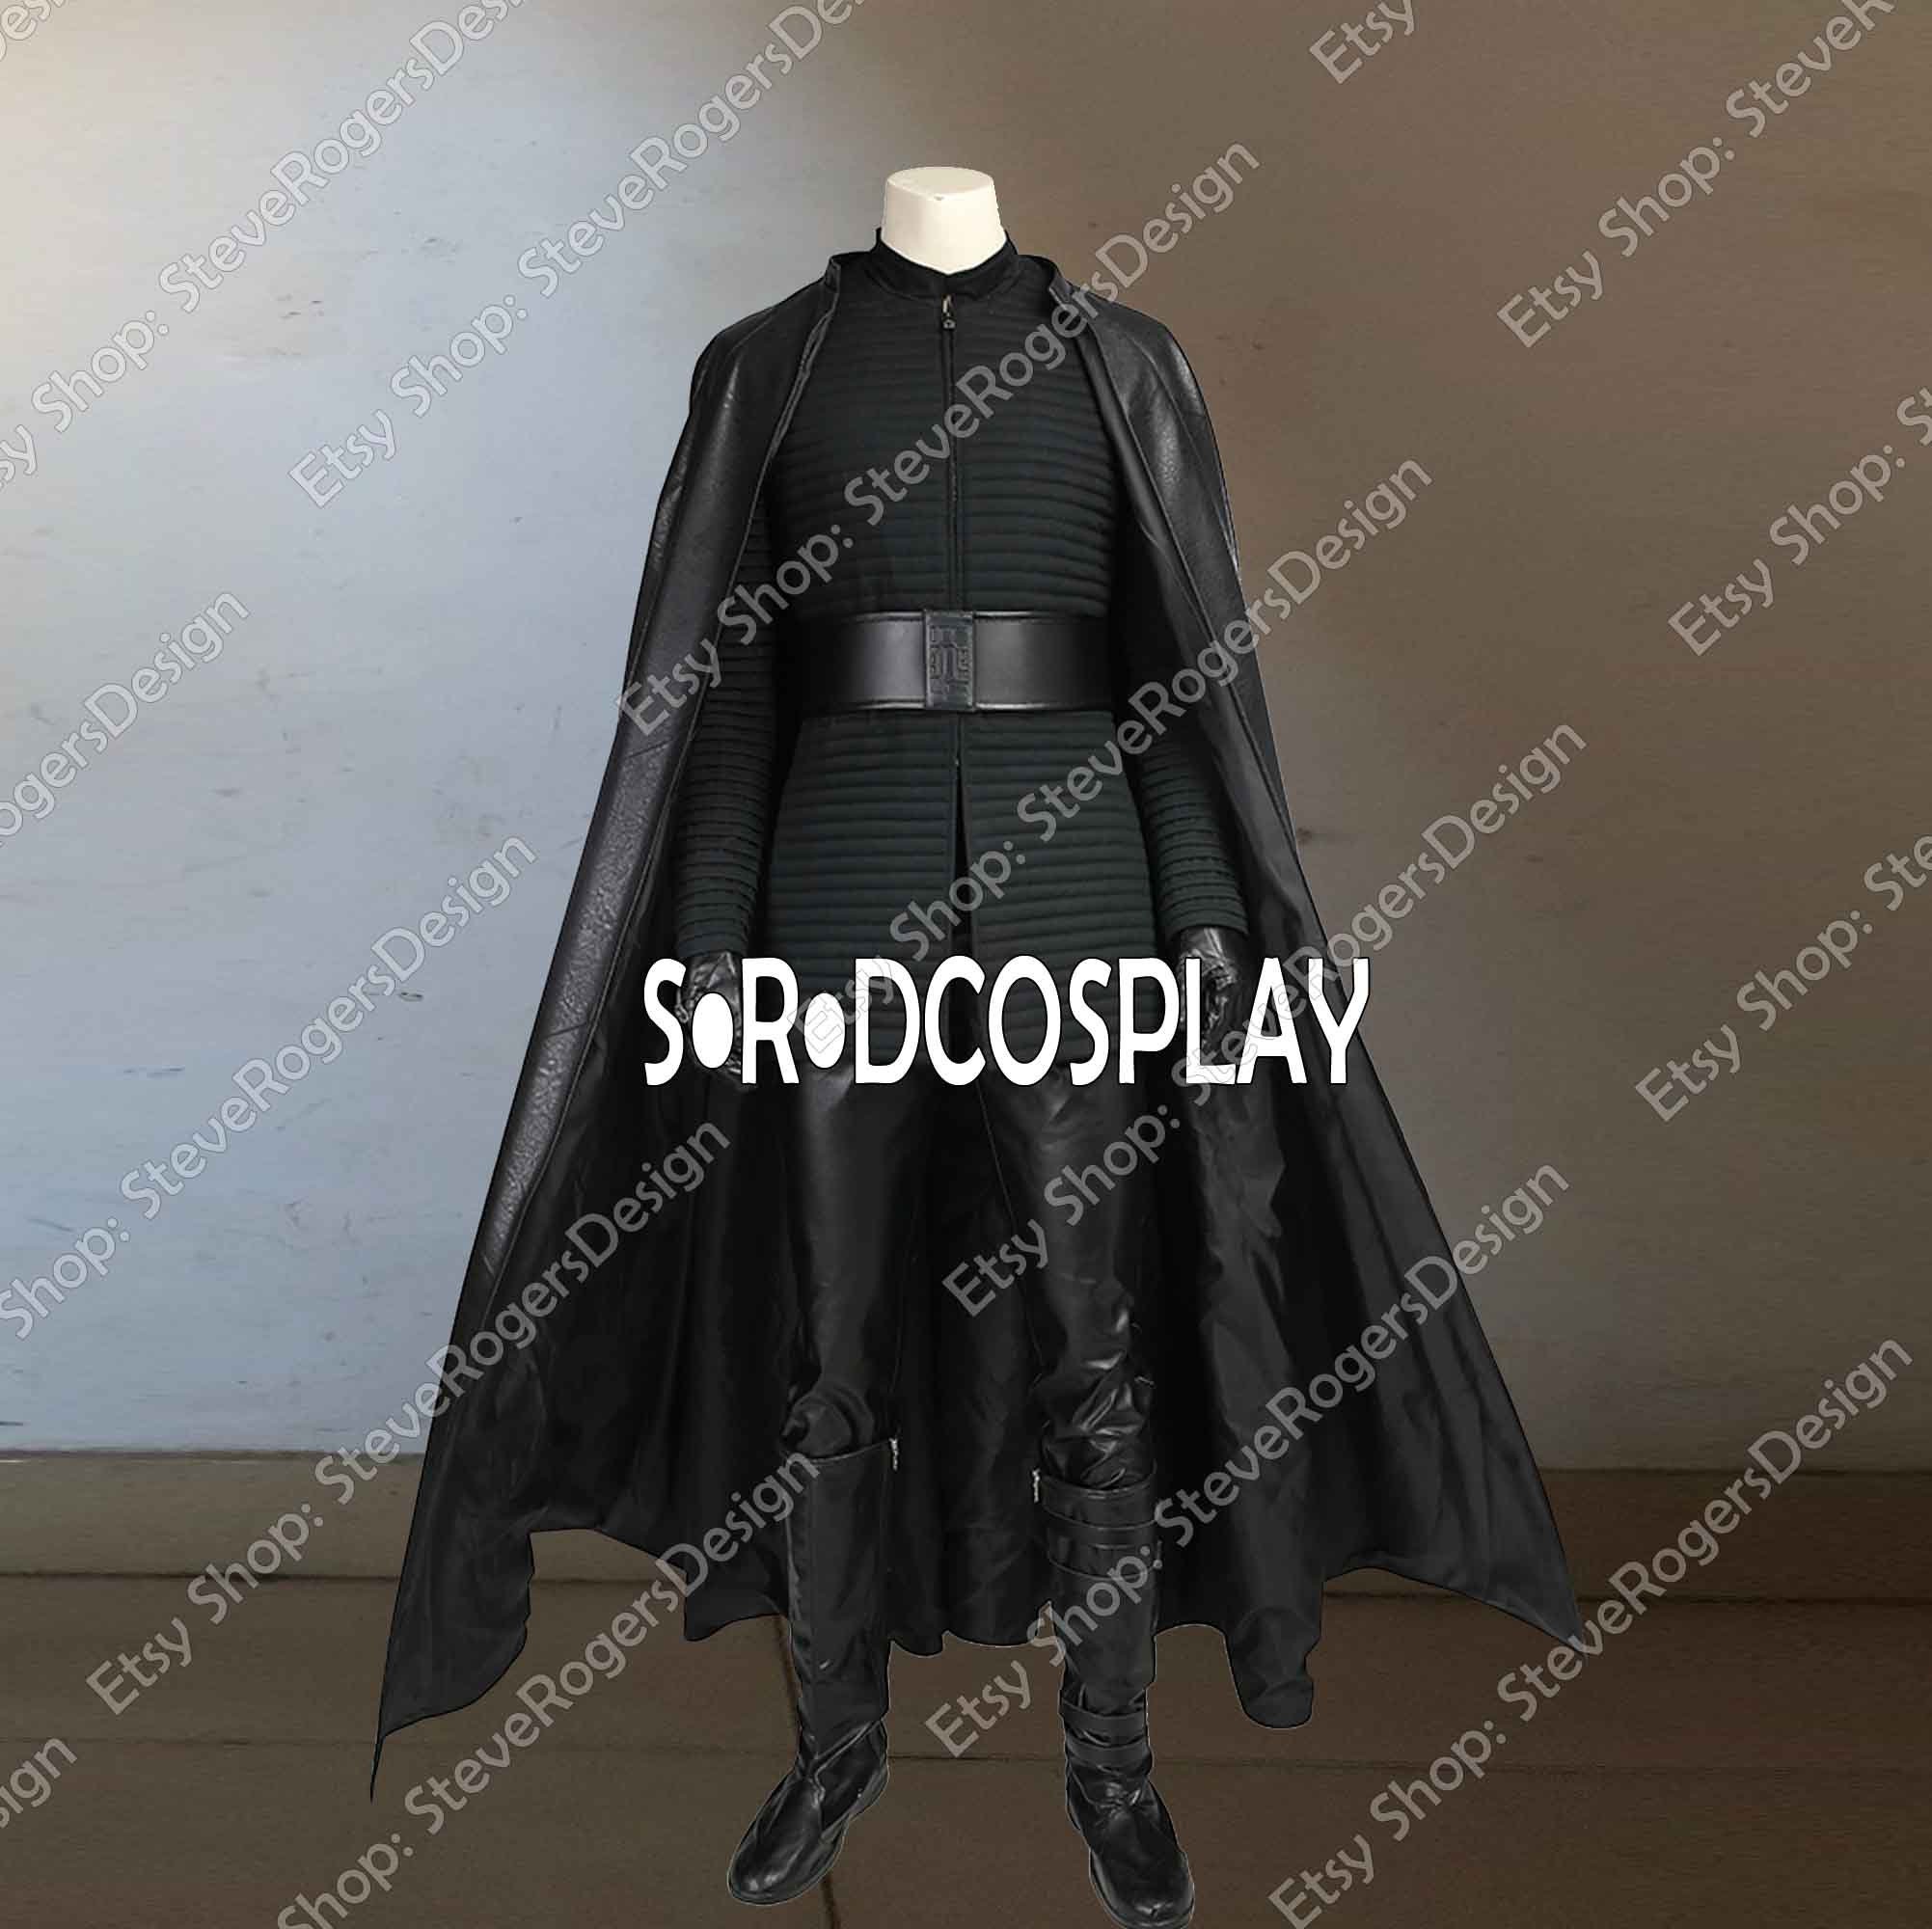 Kylo Ren Costume Waxed Trousers Made To Order Star Wars Clothing Gender-Neutral Adult Clothing Costumes Cosplay 